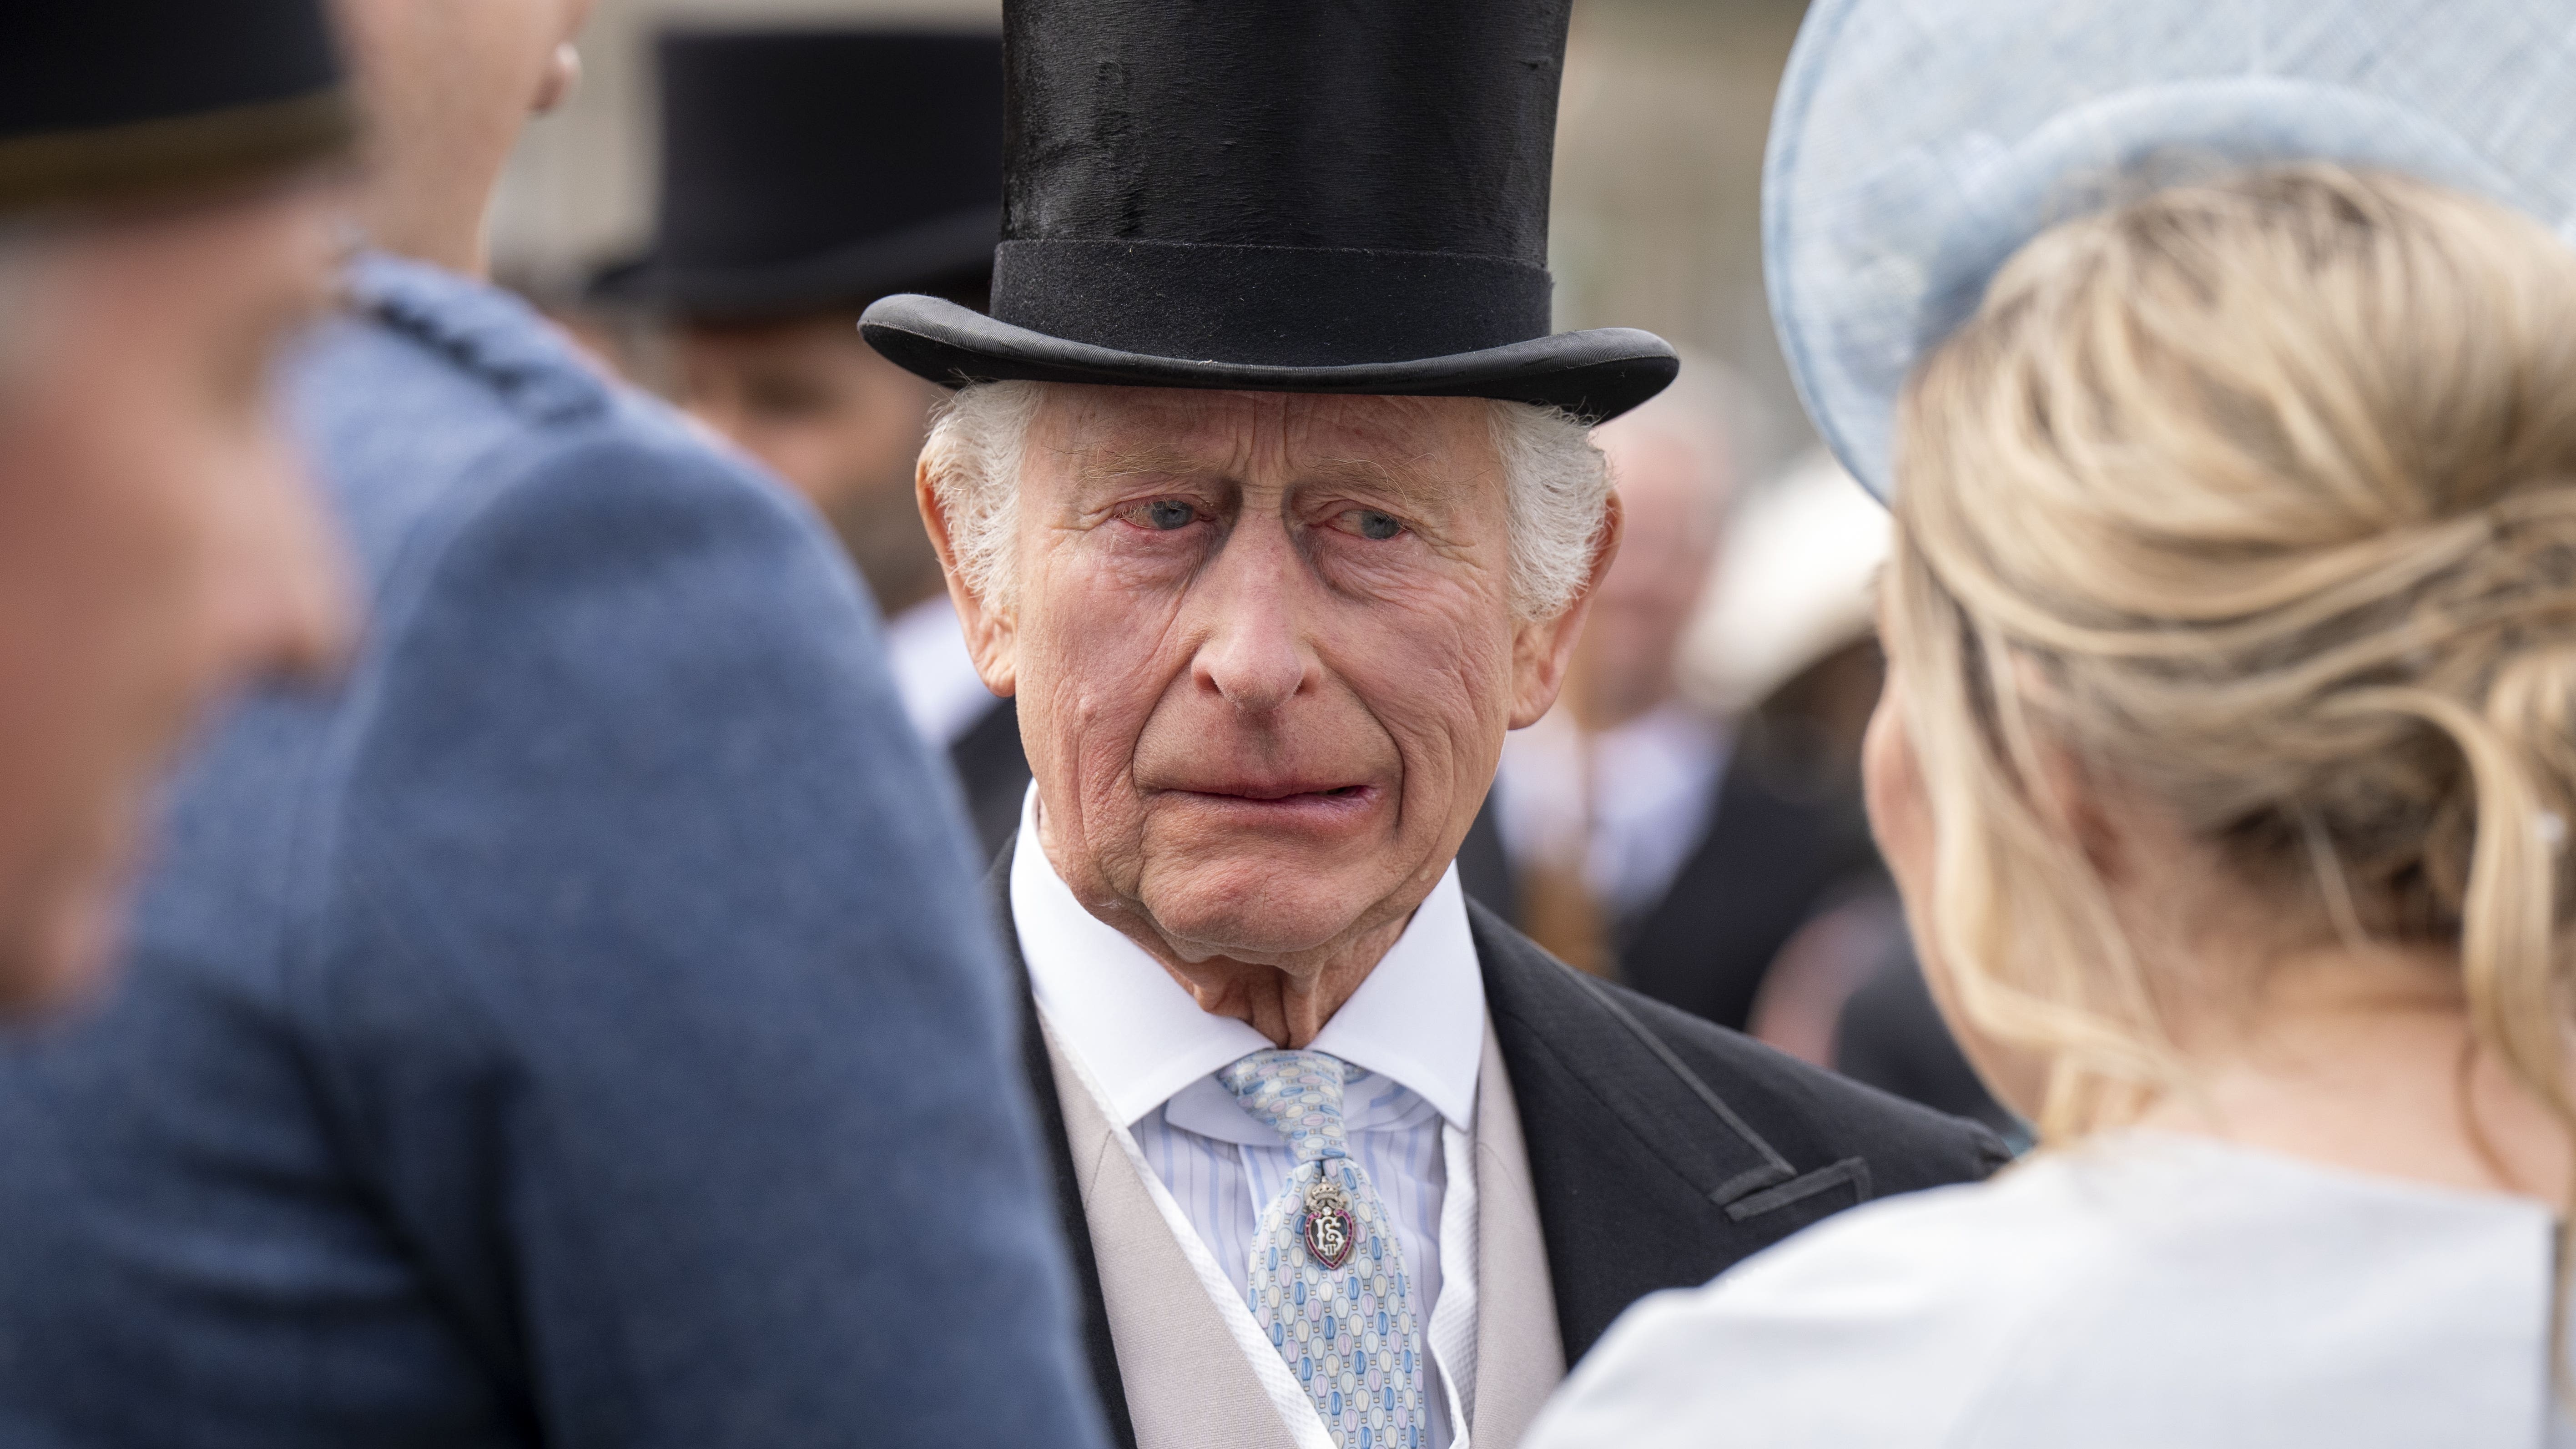 Charles shares memories of school cricket match as he hosts garden party